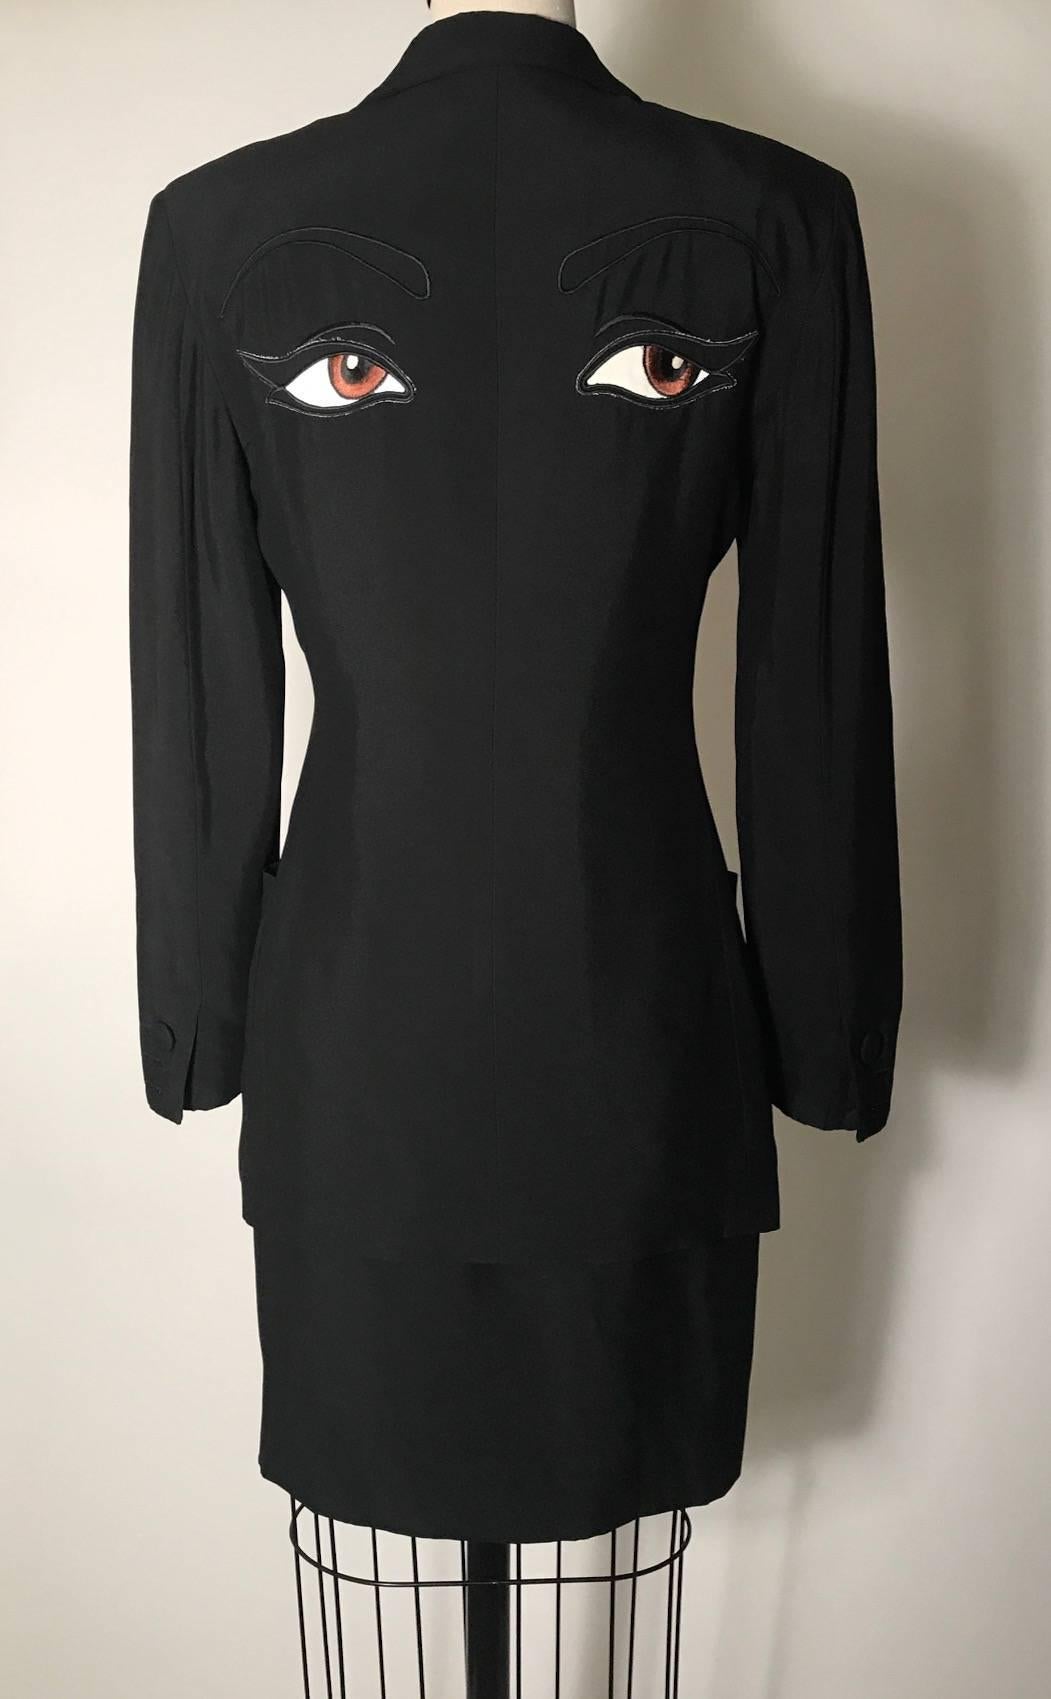 Moschino Couture vintage  'The Eyes' skirt suit from Franco Moschino's Spring 1990 collection. Black blazer features an appliquéd and embroidered pair of eyes at back. Strong, slightly padded shoulder, pockets at front, cloth covered buttons at